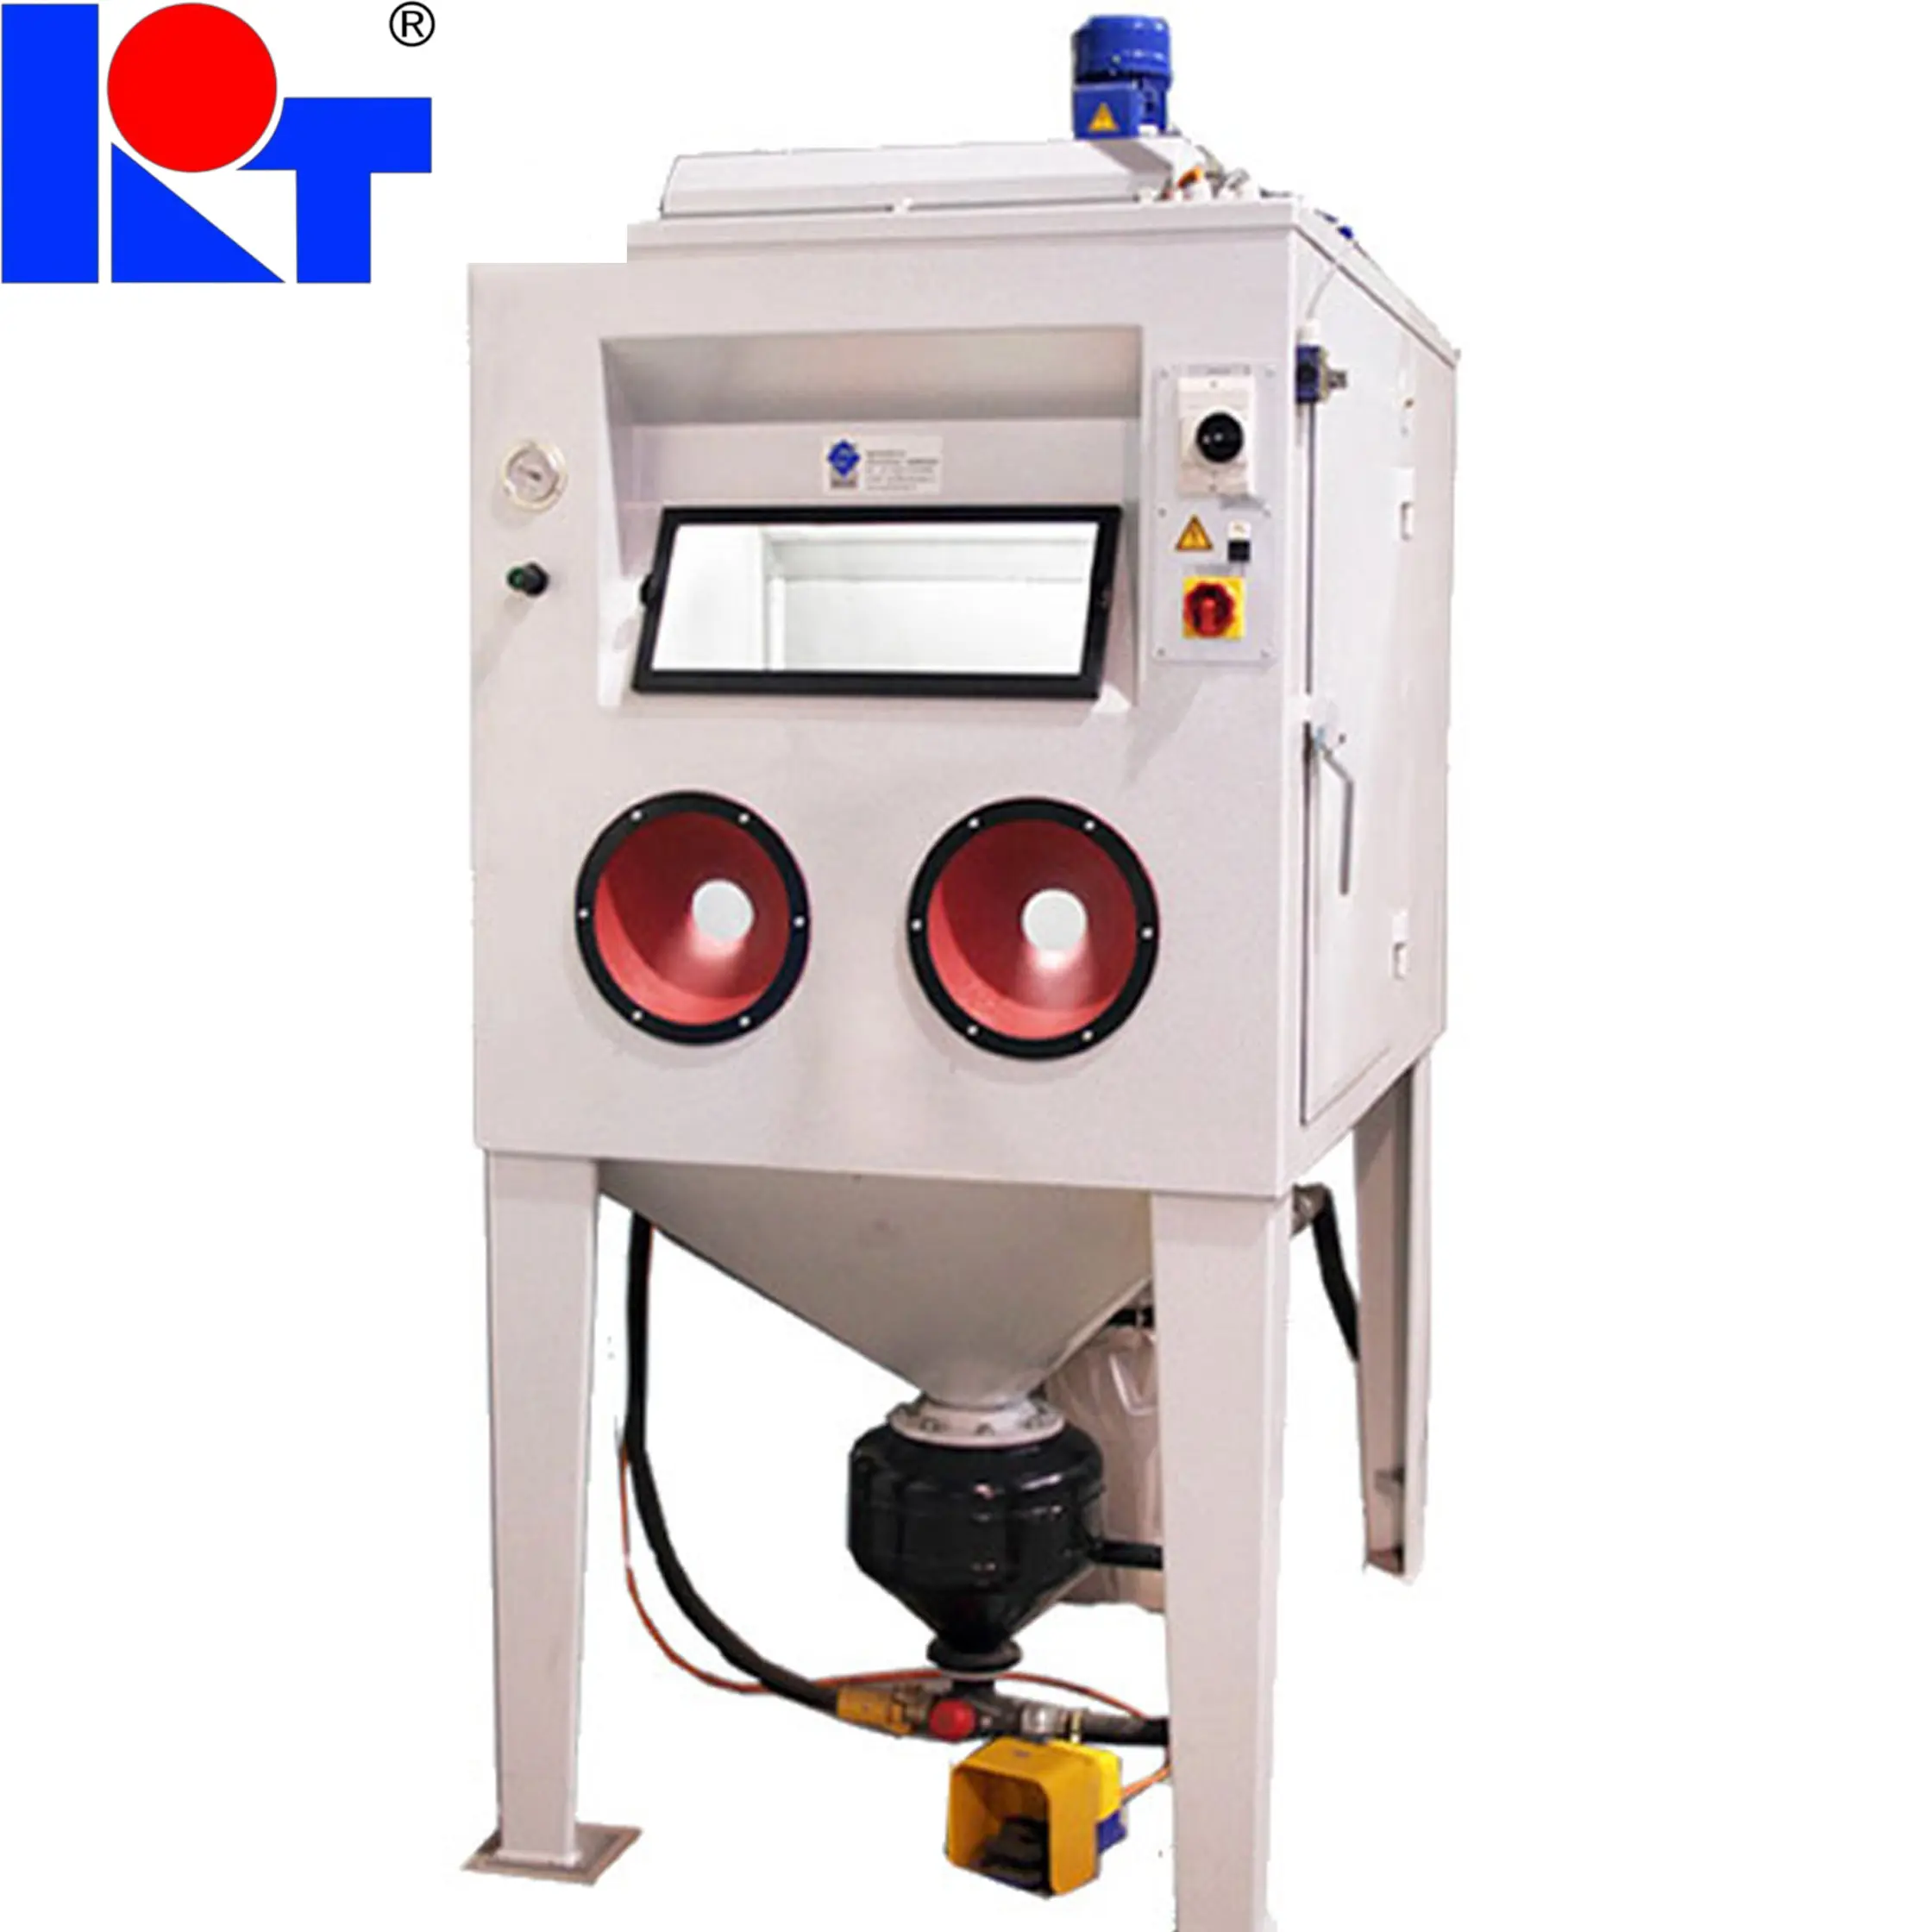 Portable Manual Wet And Dry Sand Blaster Machine